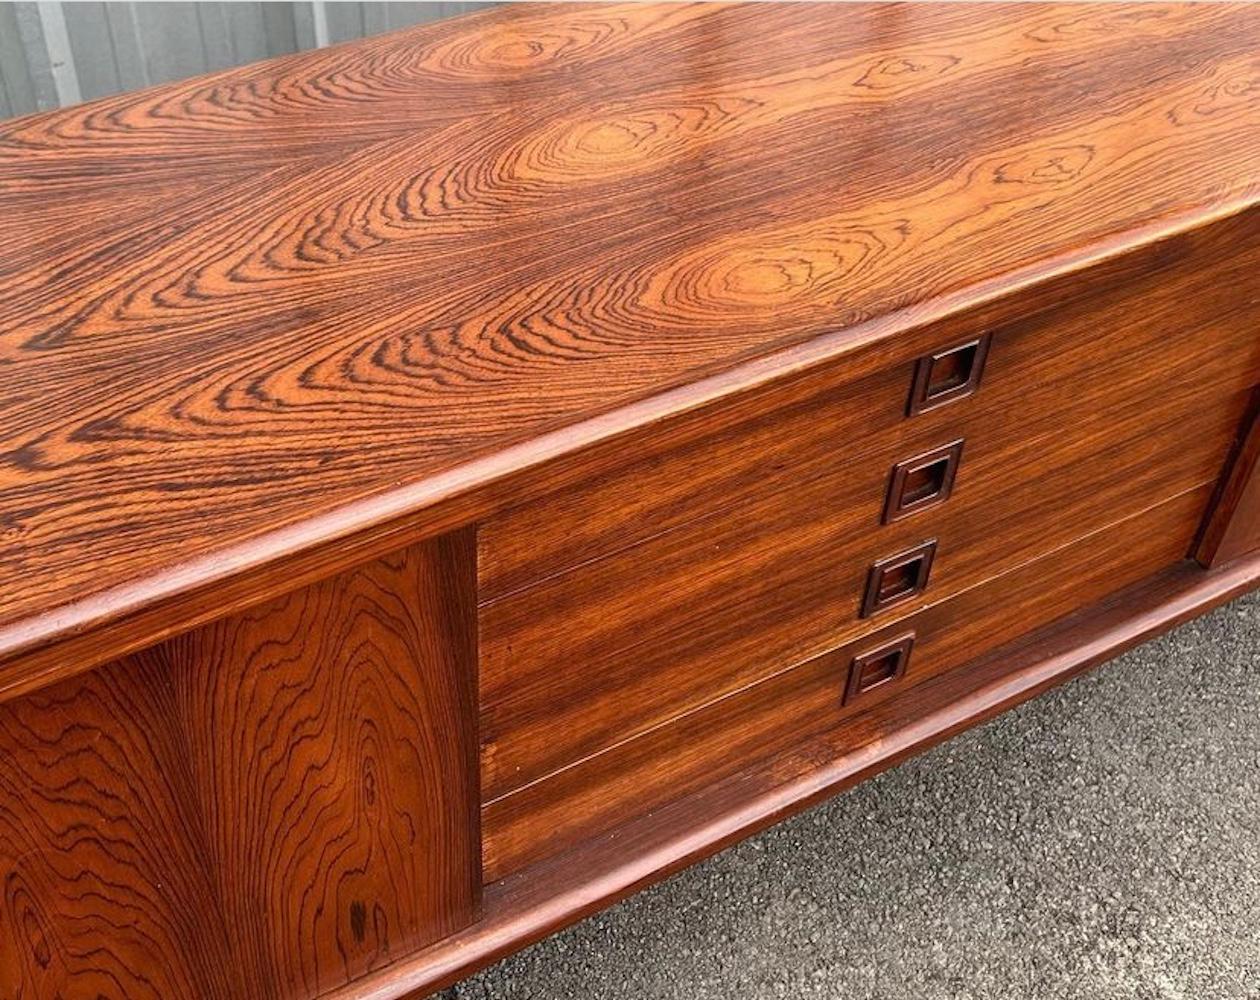 Danish Modern Rosewood sideboard by HW Klein for Bramin features a finished back, four drawers with uniquely sculpted pulls, and two sliding doors that open up to spacious shelving (a total of 4 shelves). This vintage sideboard measures at 88.50